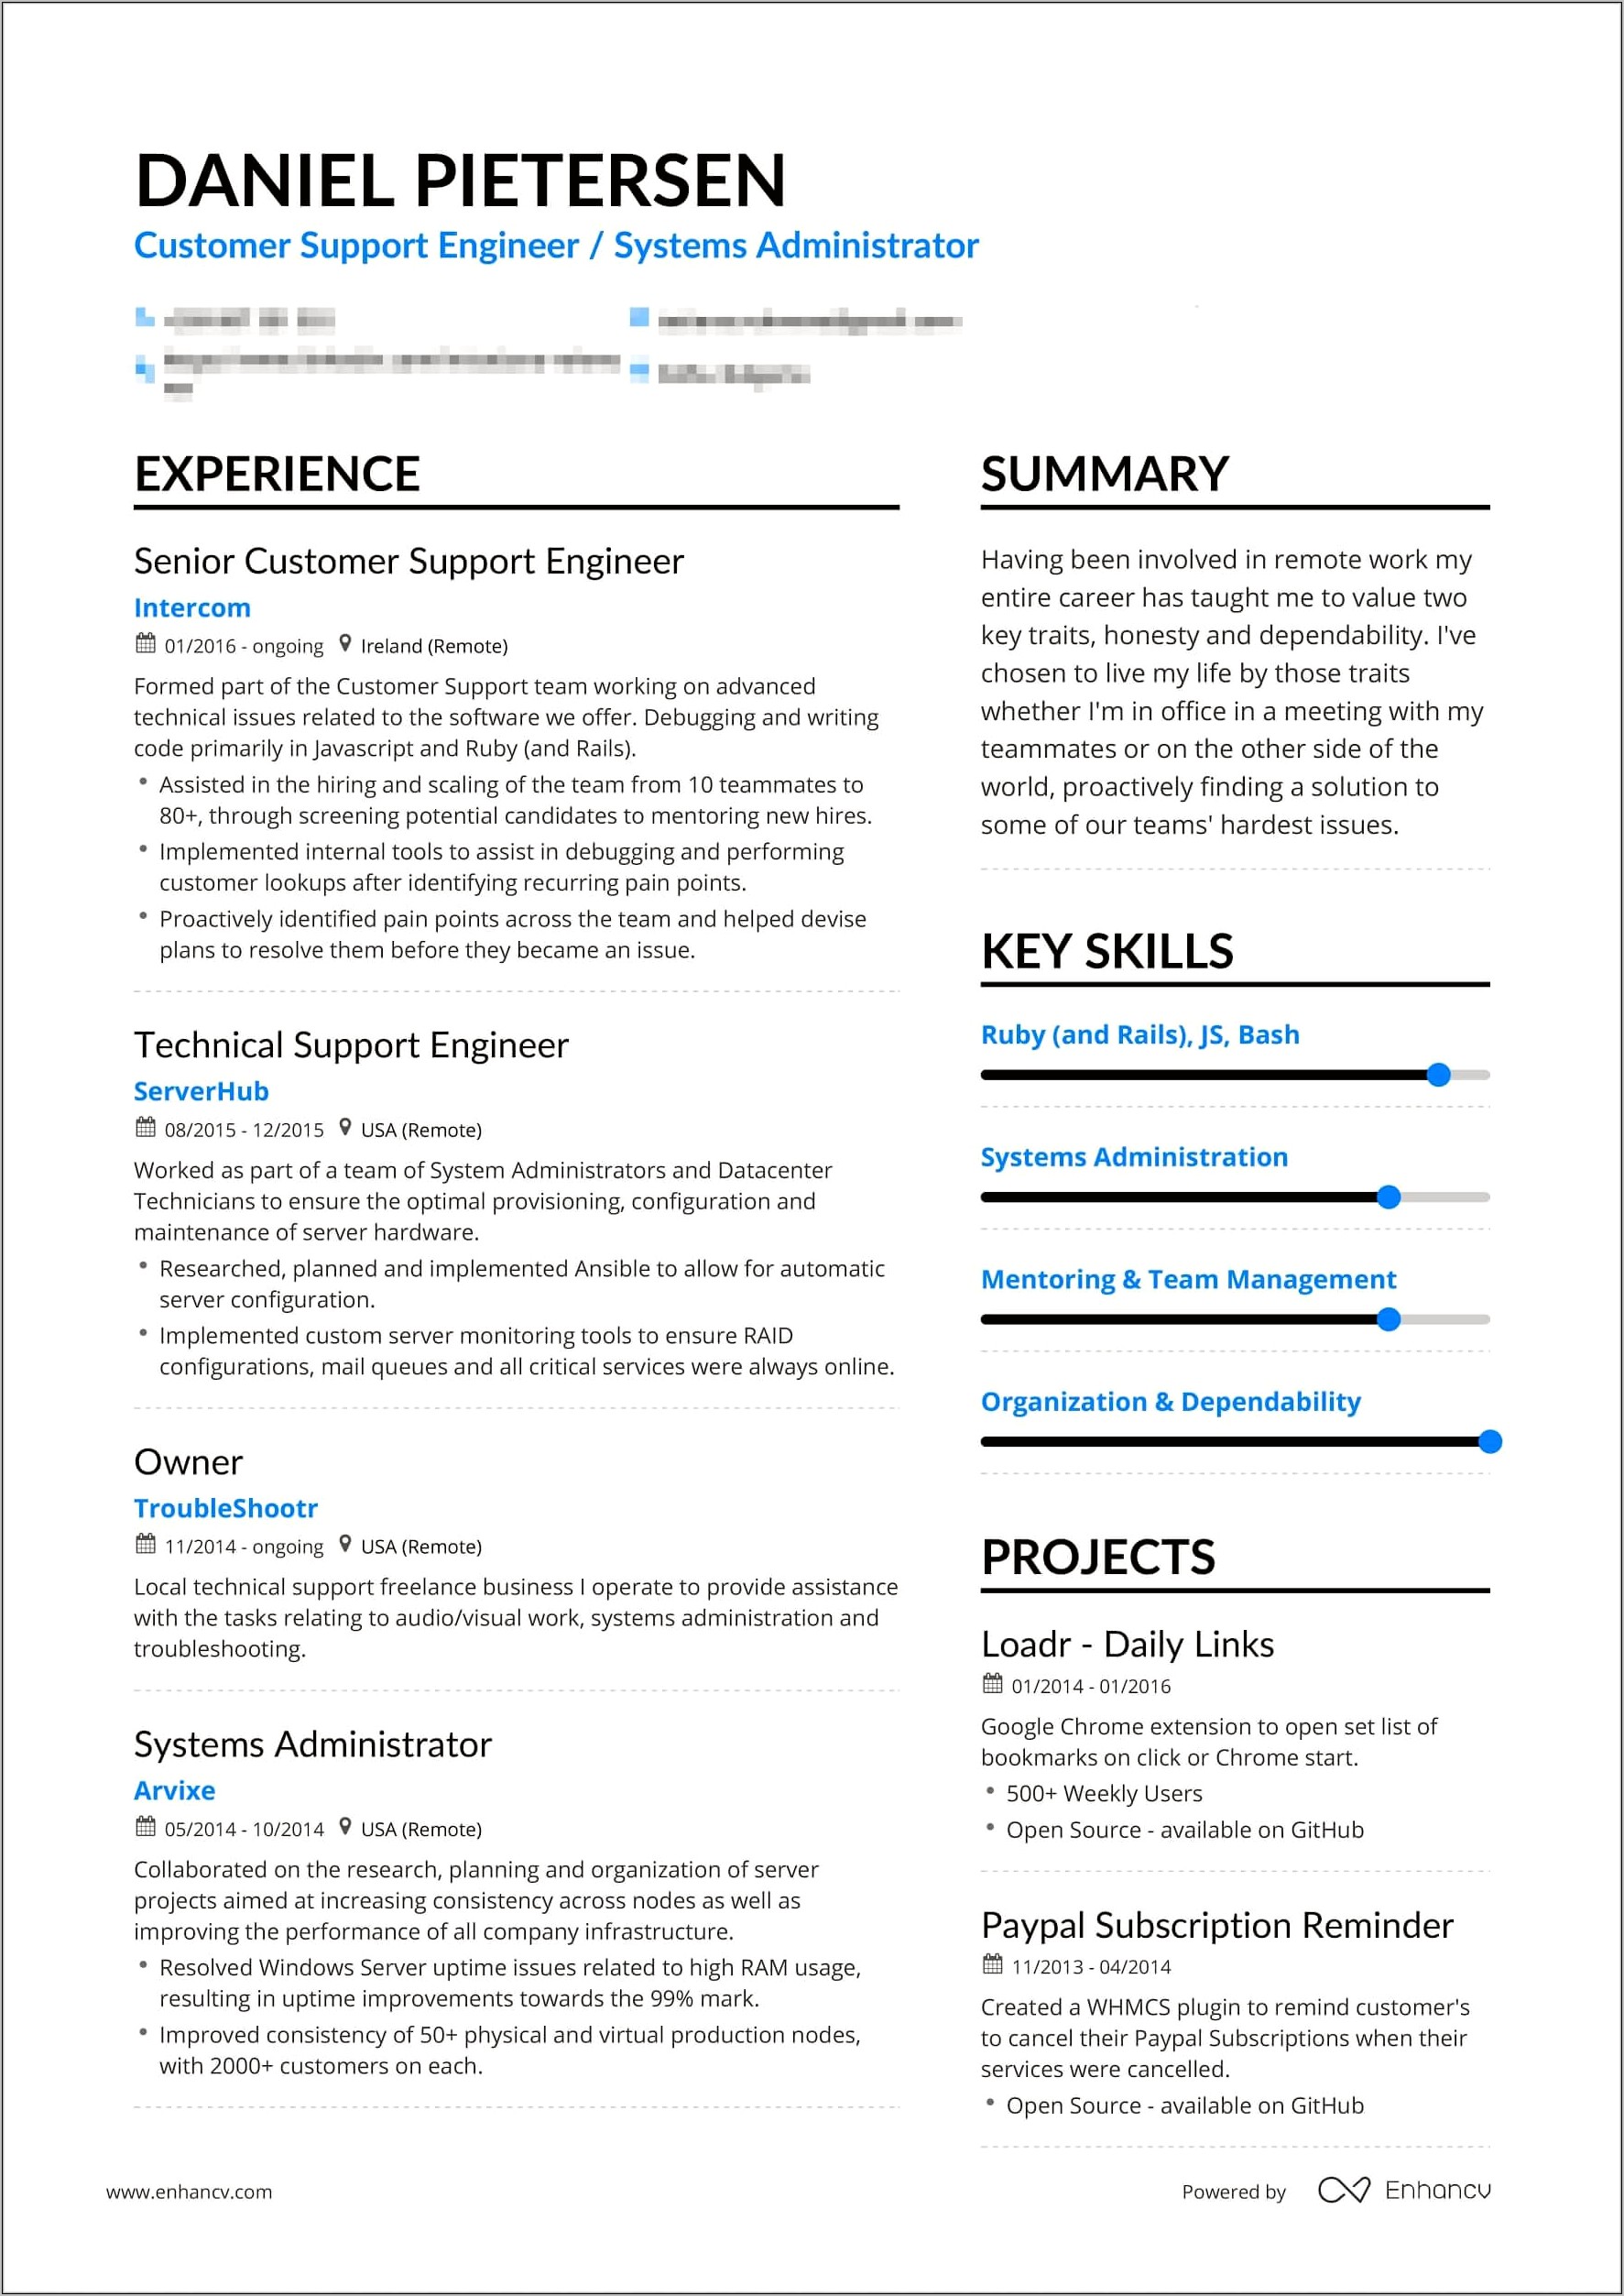 Should I Exclude Irrelevant Work From Resume